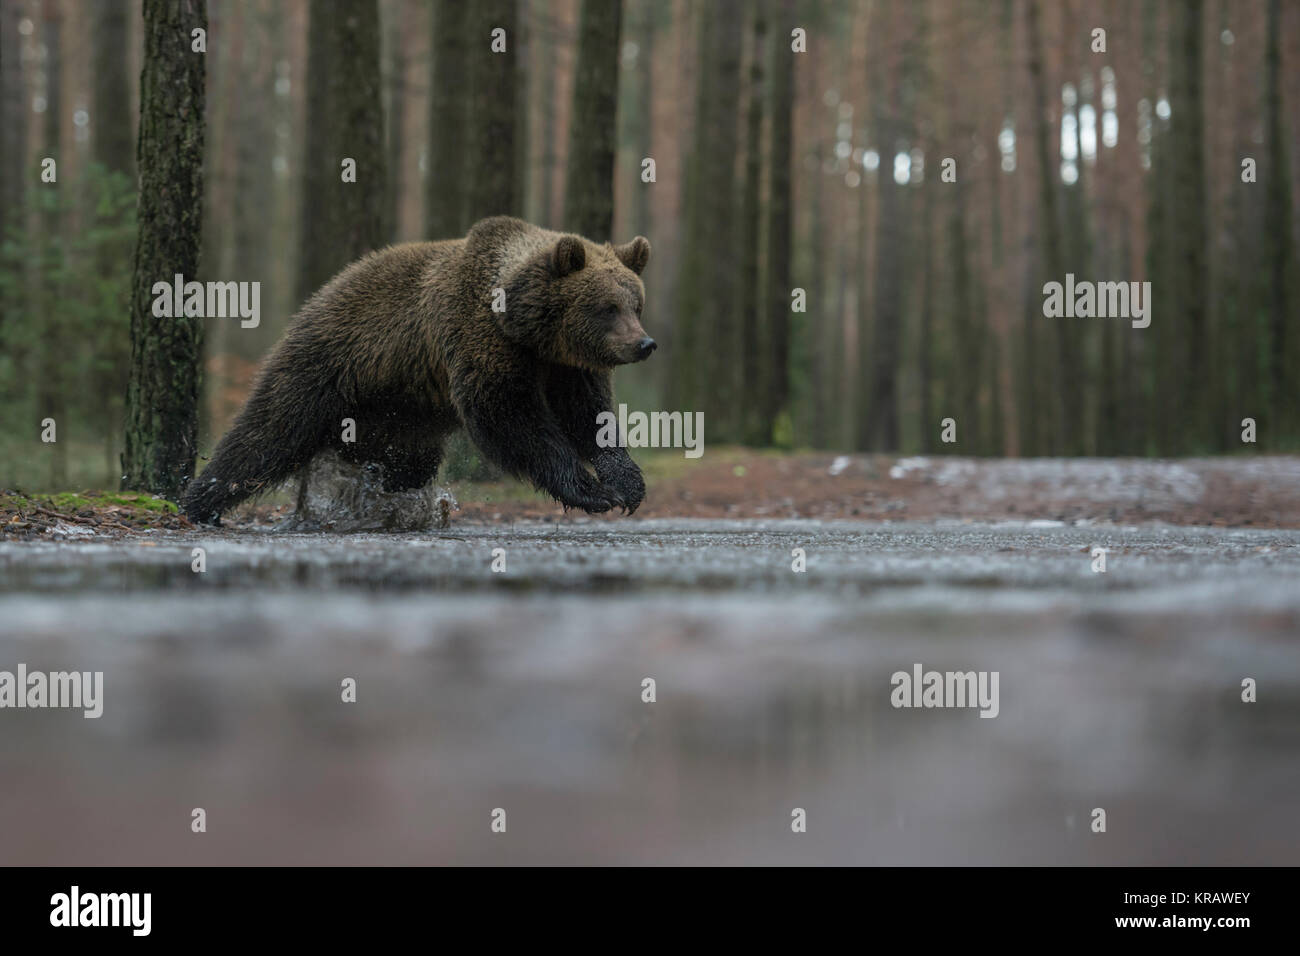 Eurasian Brown Bear ( Ursus arctos ), young cub, adolescent, running, jumping through a frozen puddle, crossing a forest road in winter, Europe. Stock Photo